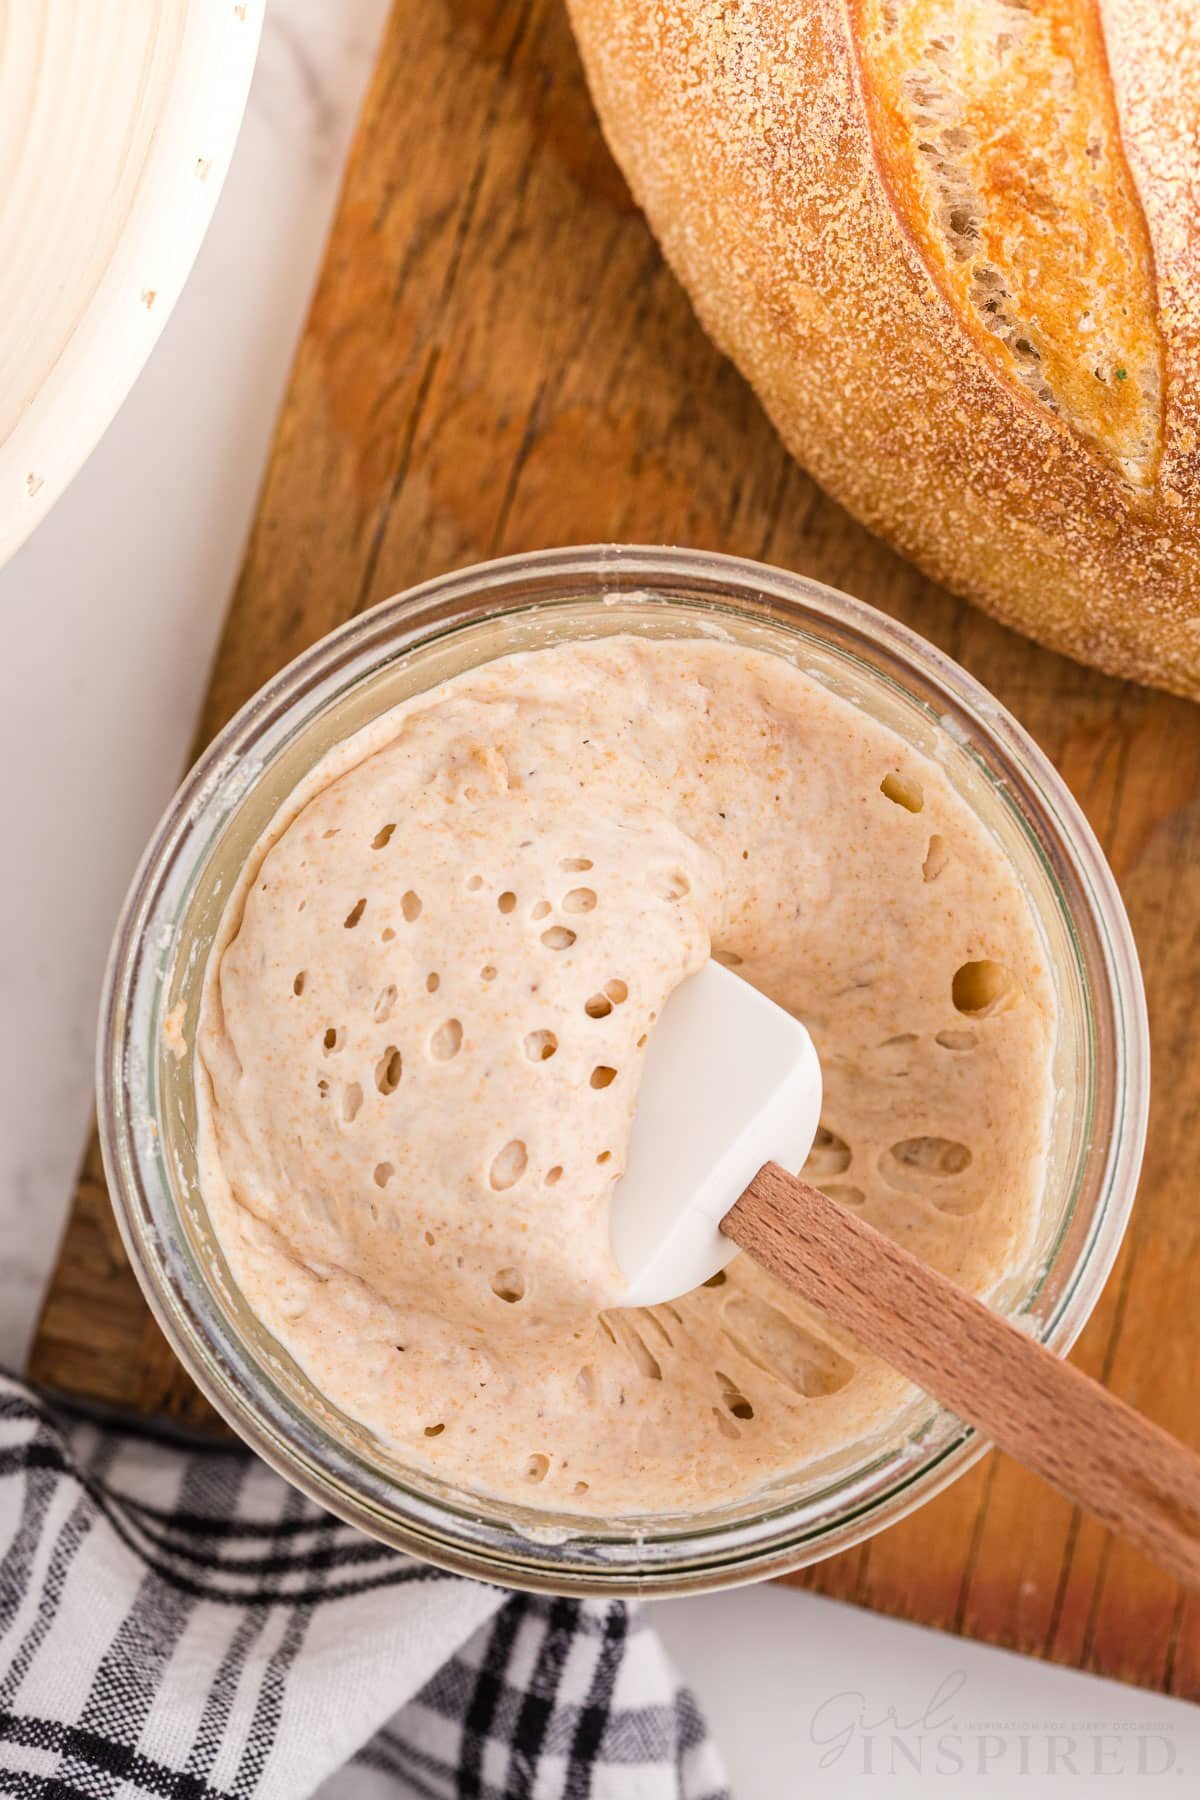 bubbly sourdough starter in a glass bowl with spatula.